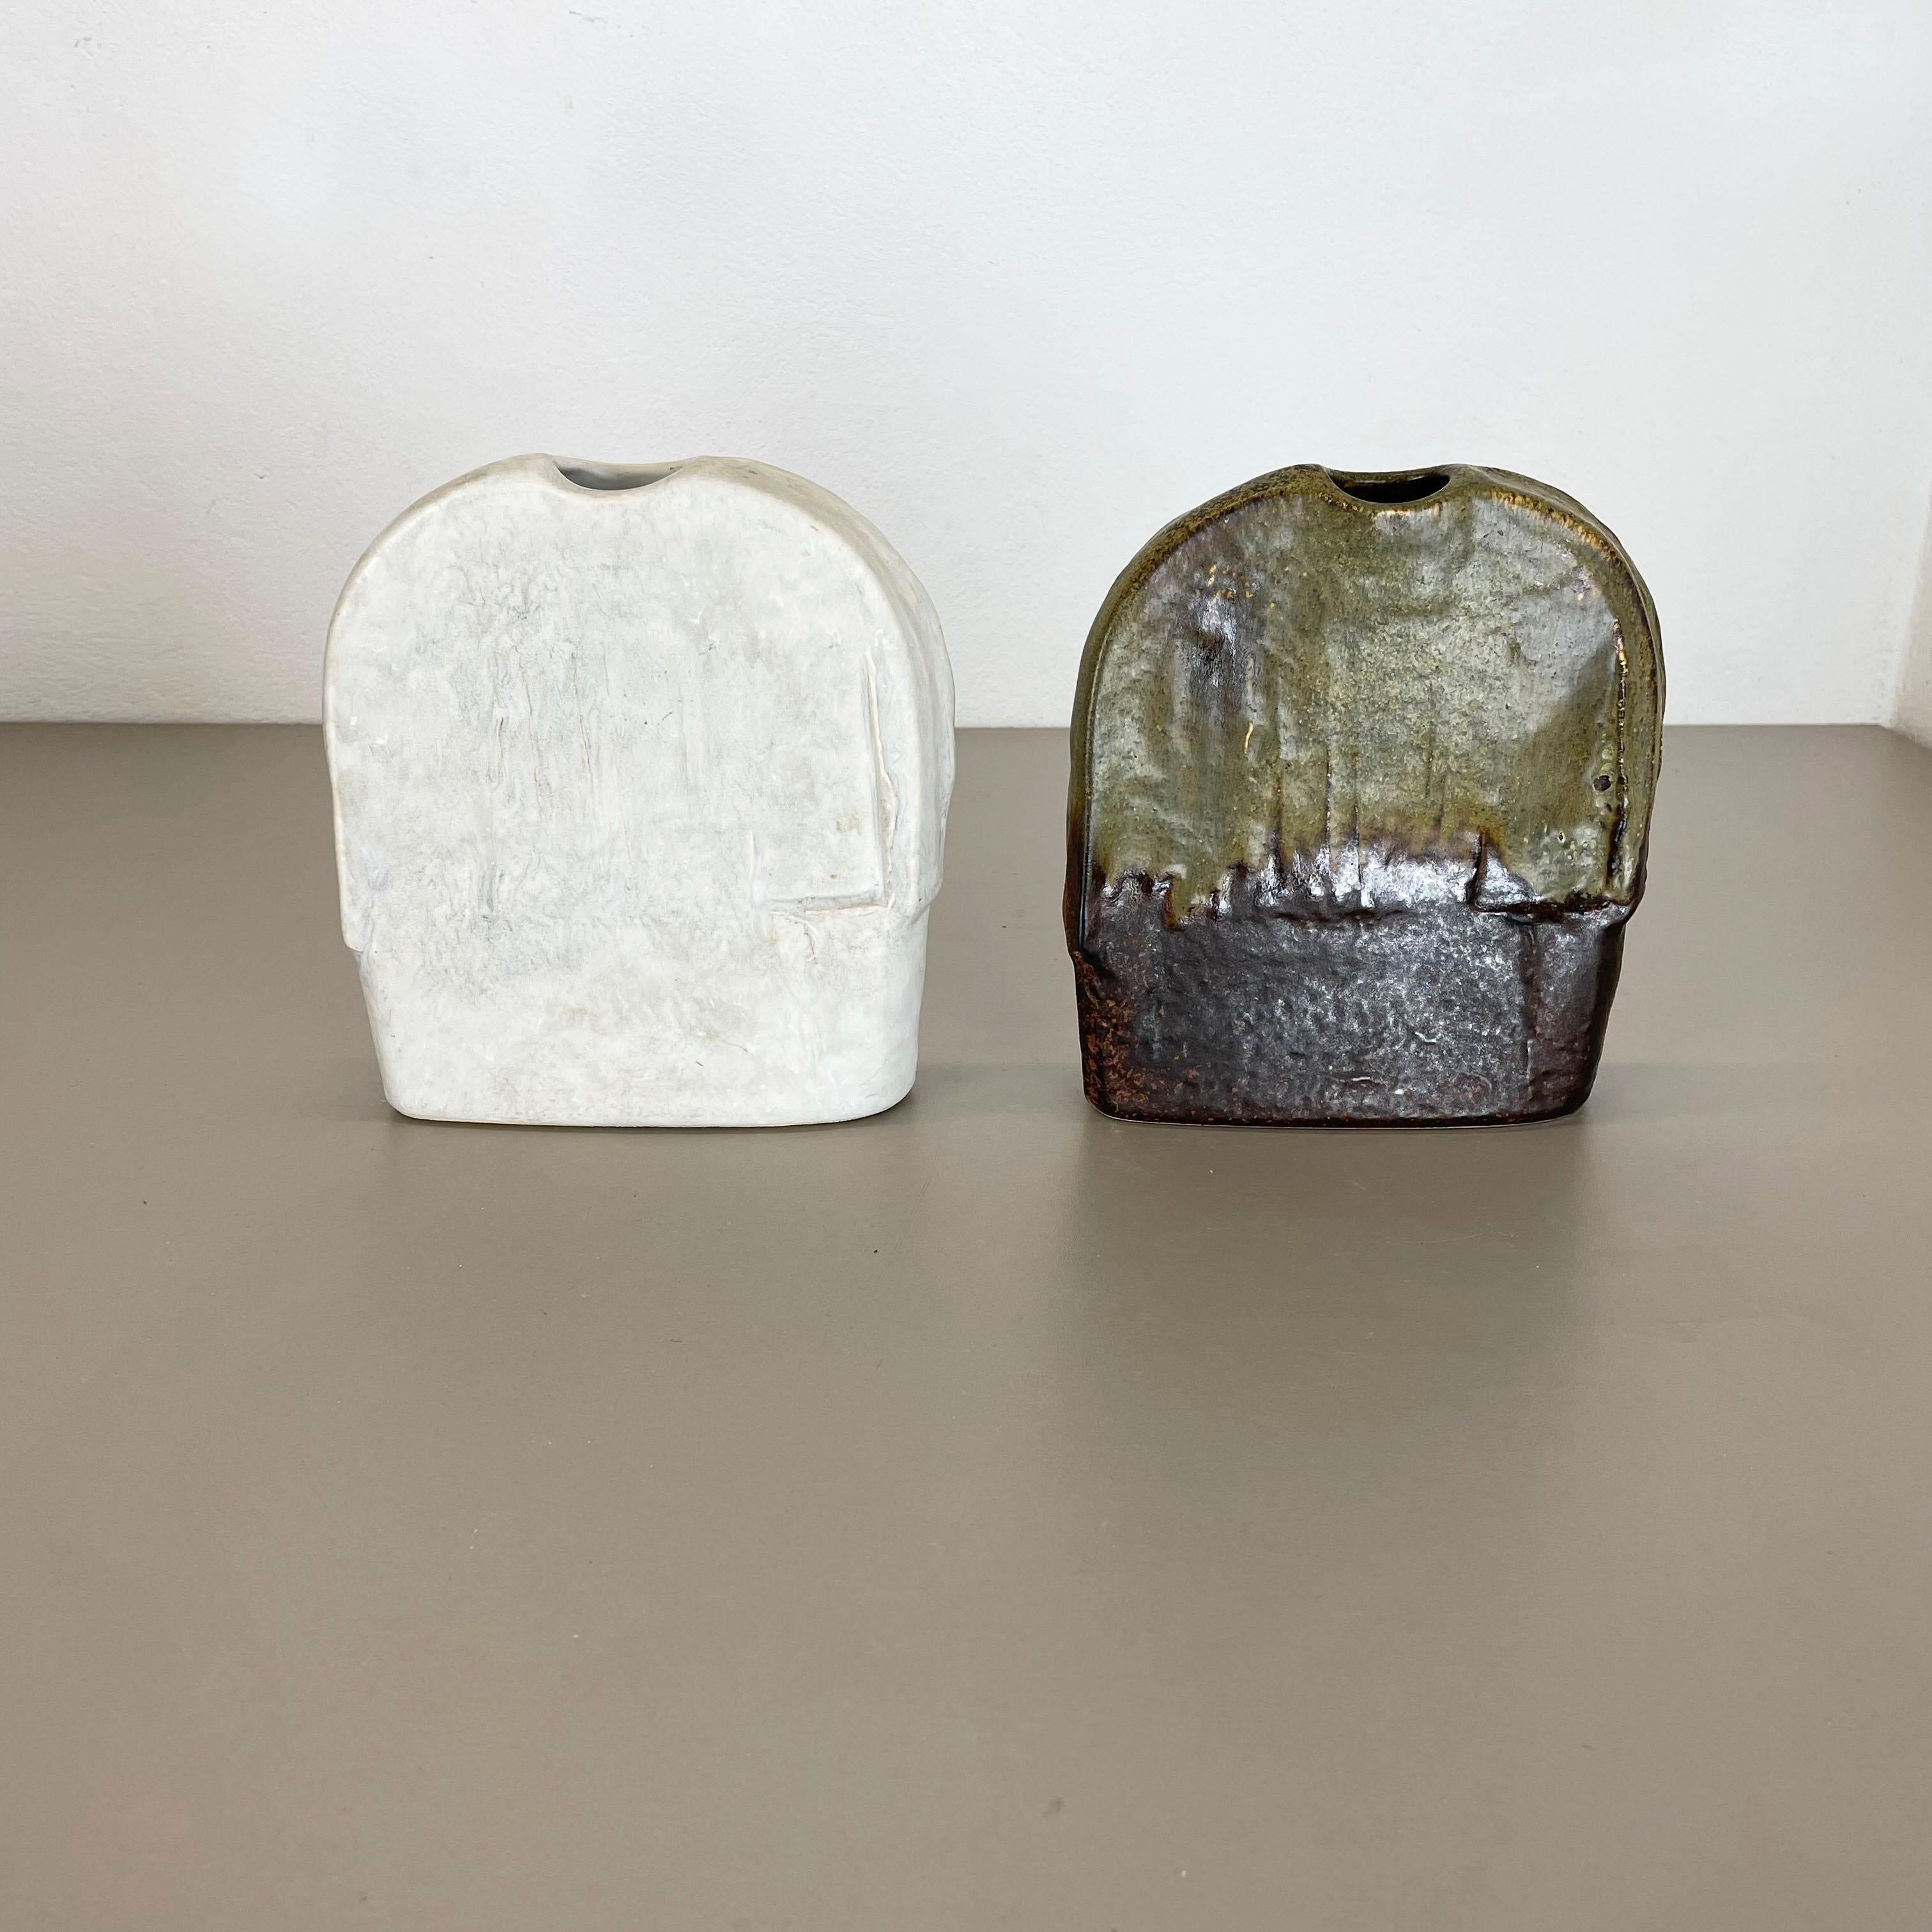 Article:

Ceramic vase object set of 2


Design: 

Heiner Balzar


Producer:

Steuler, Germany



Decade:

1970s


This original vintage ceramic object set was produced by Steuler in the 1970s in Germany. Its was designed by